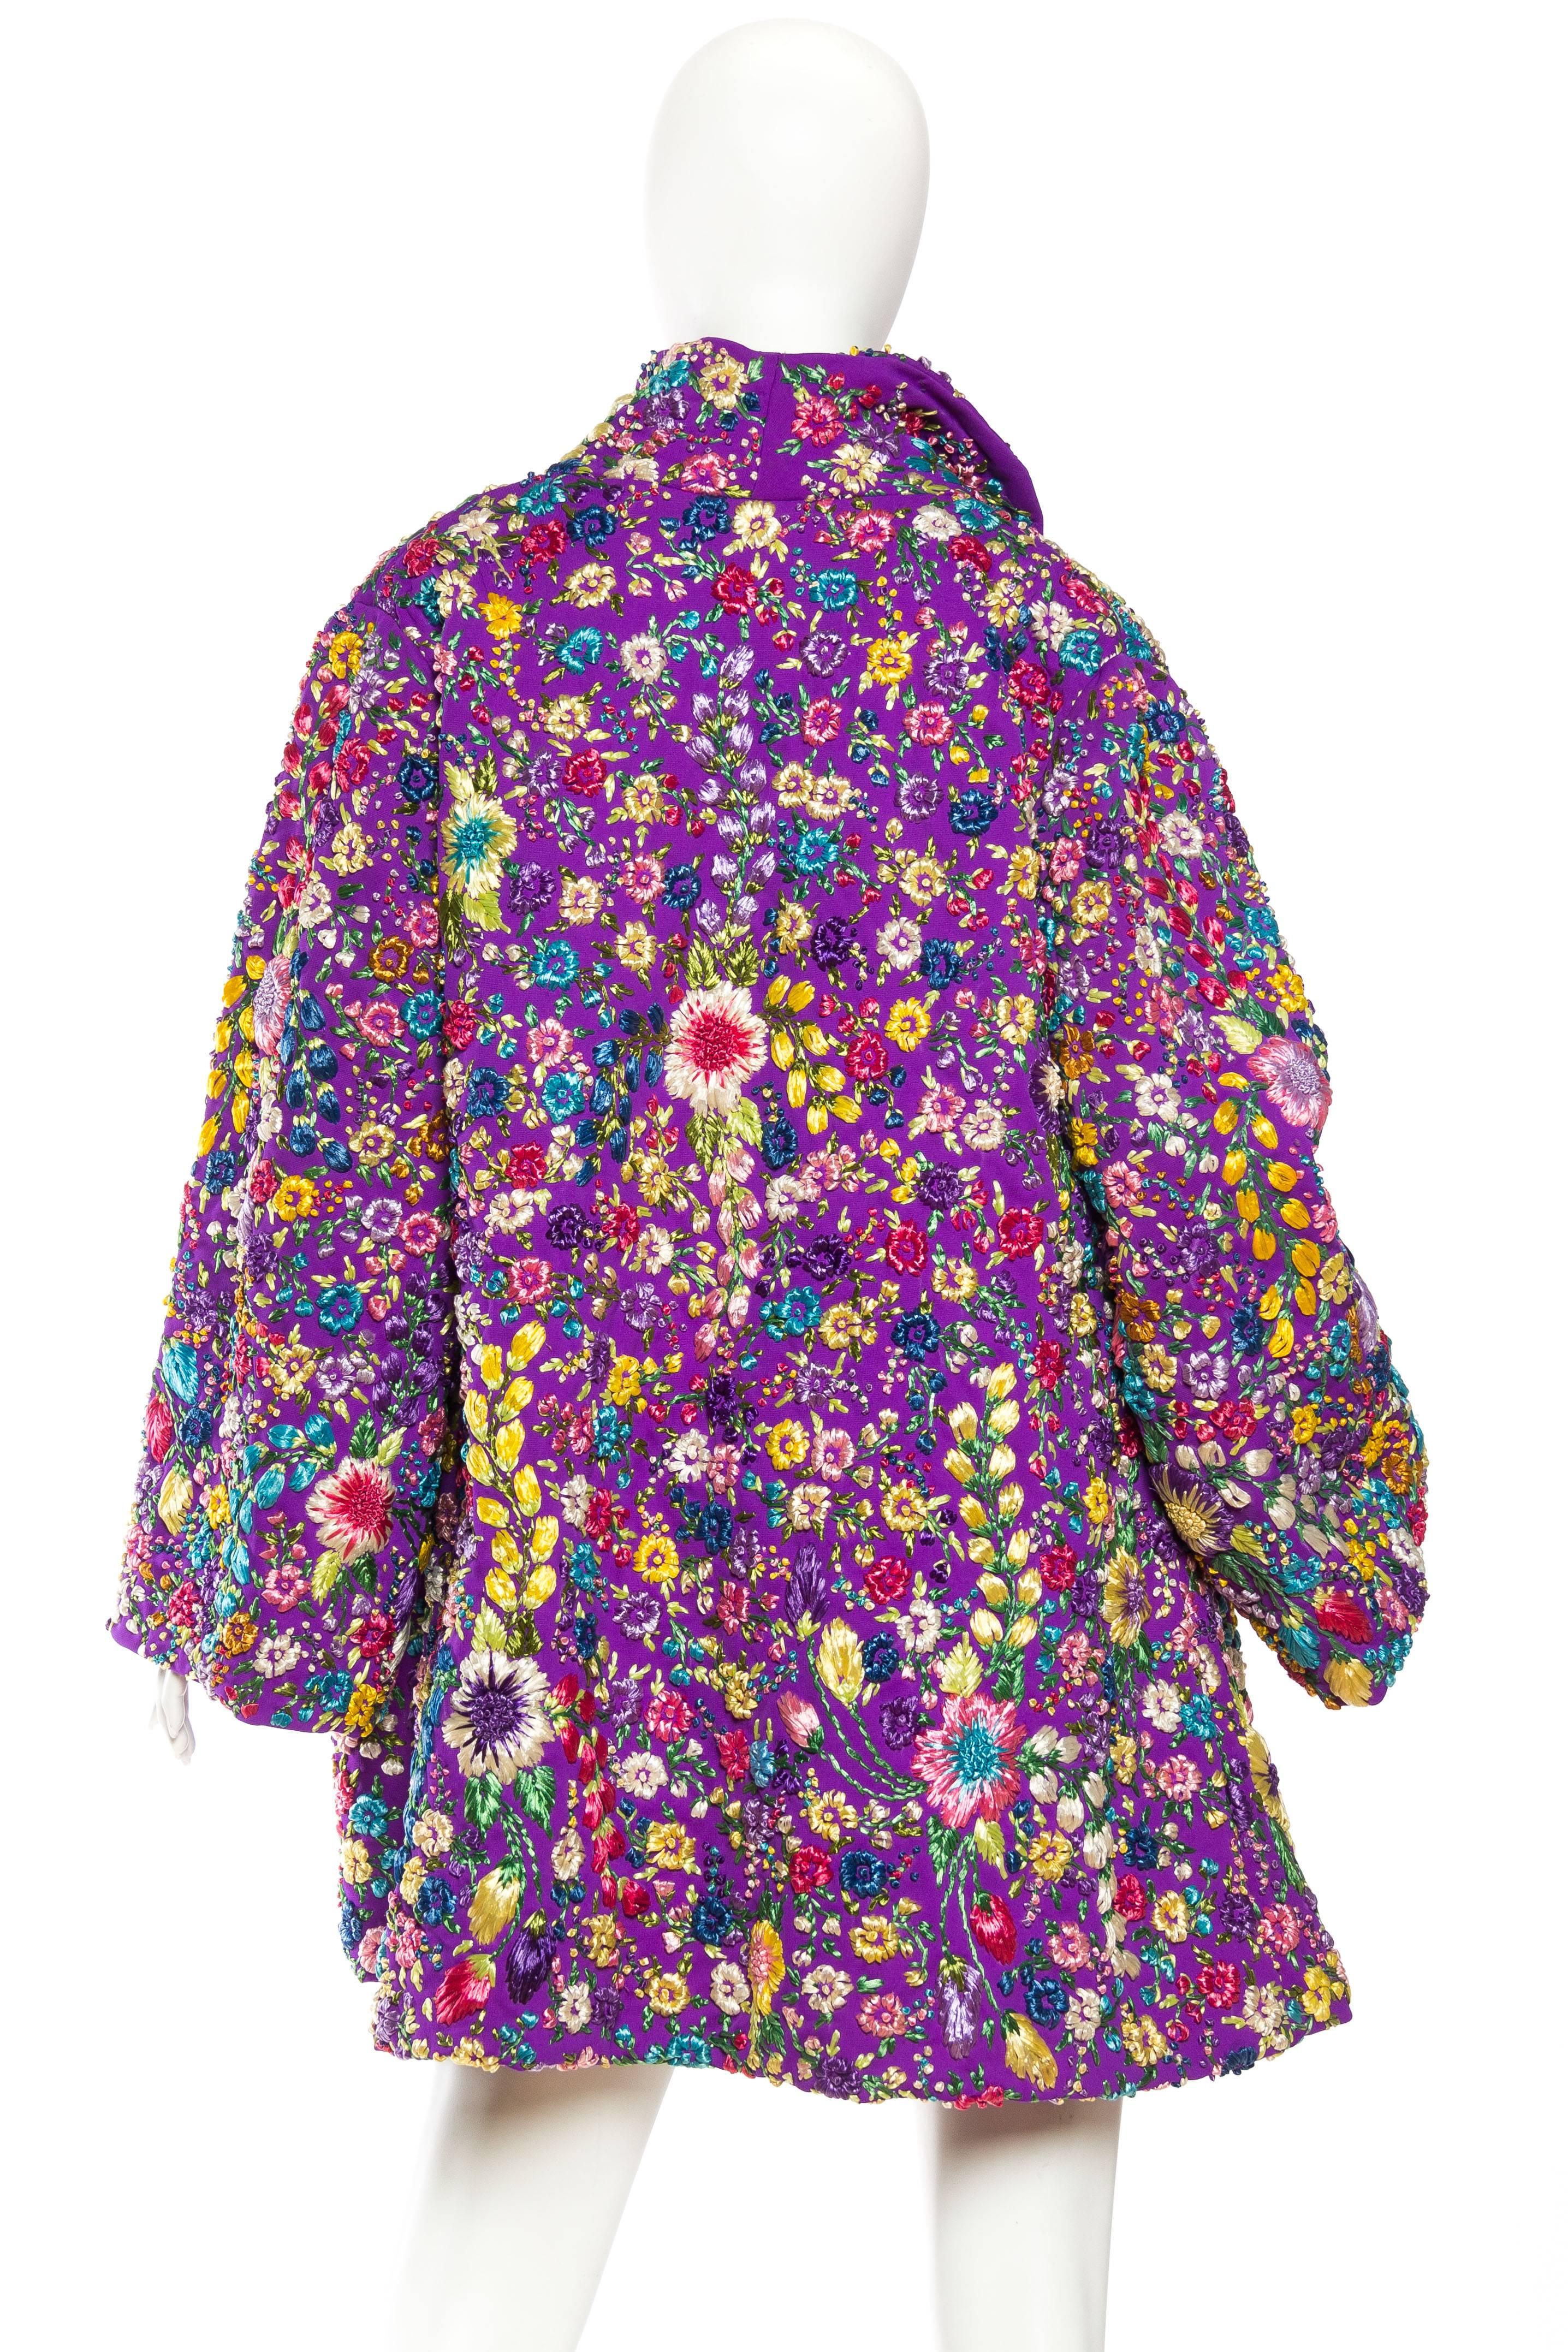 Women's Phenomenal Fully Embroidered Gucci Like Floral Coat